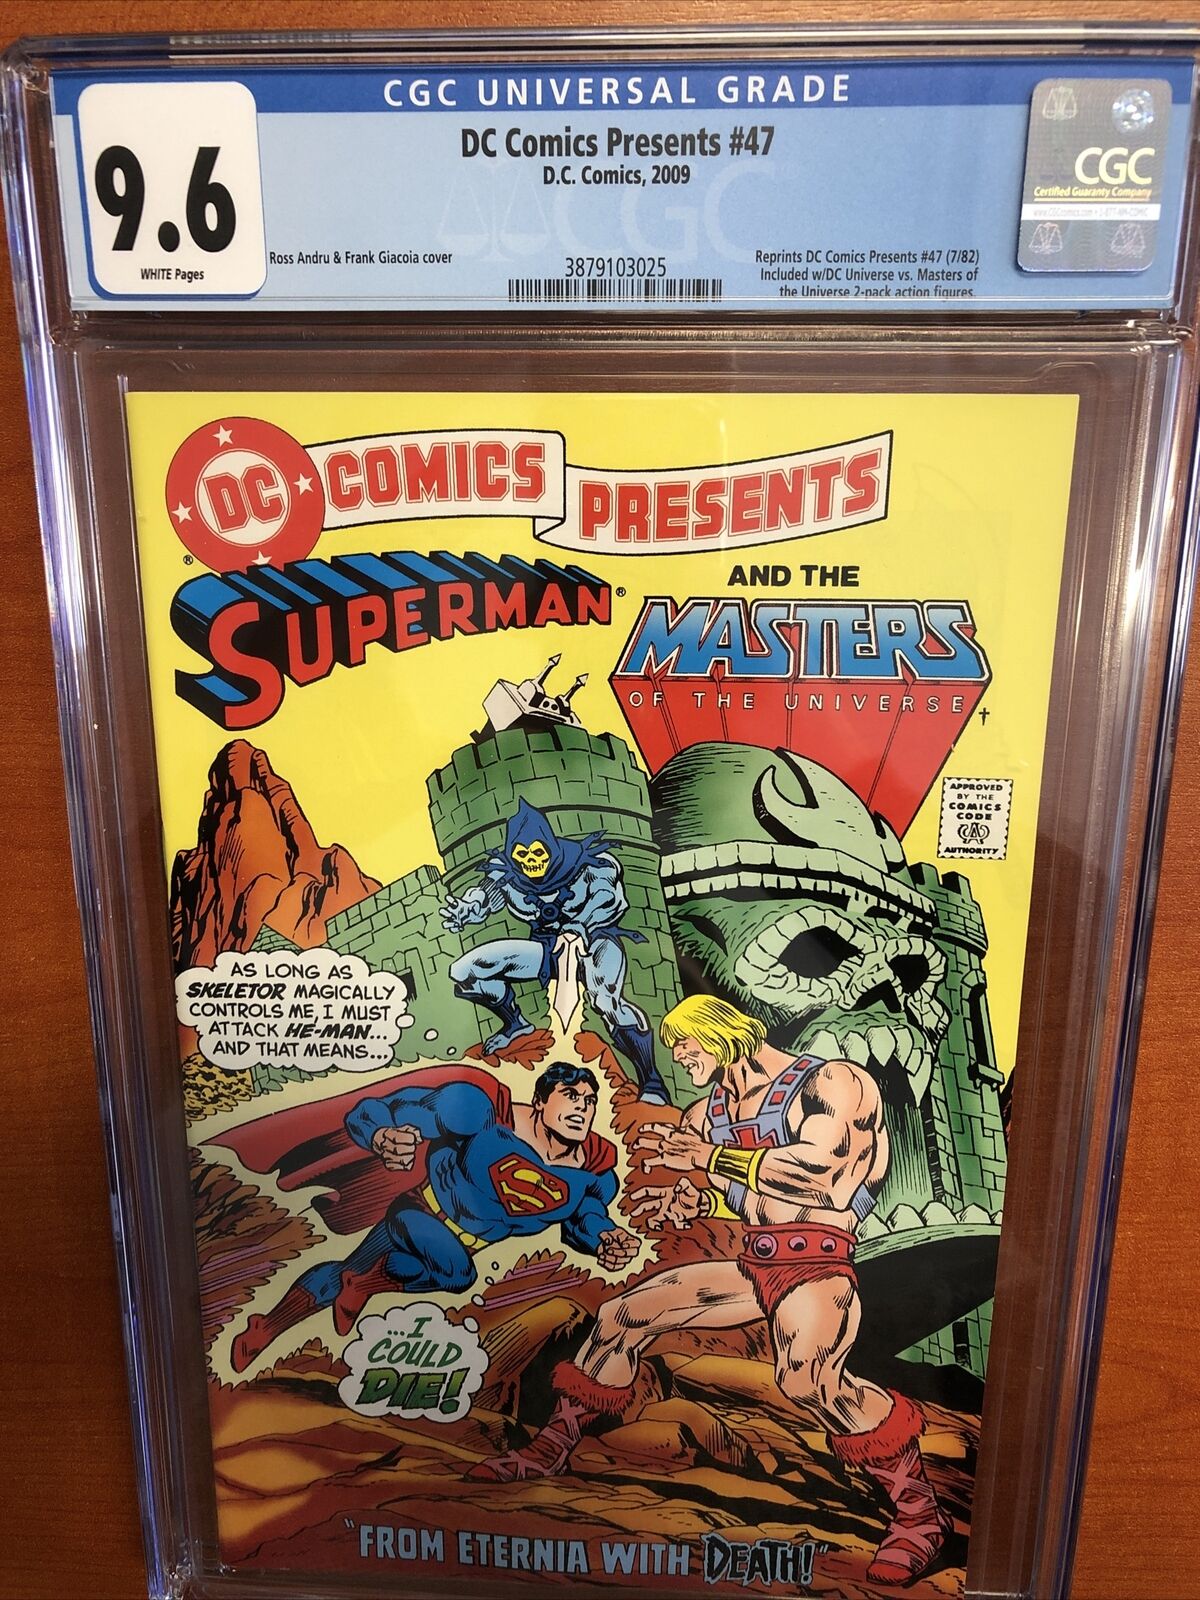 DC Comics Presents (2009) # 47 (CGC 9.6) REPRINT from 2009    Only 10 Census 